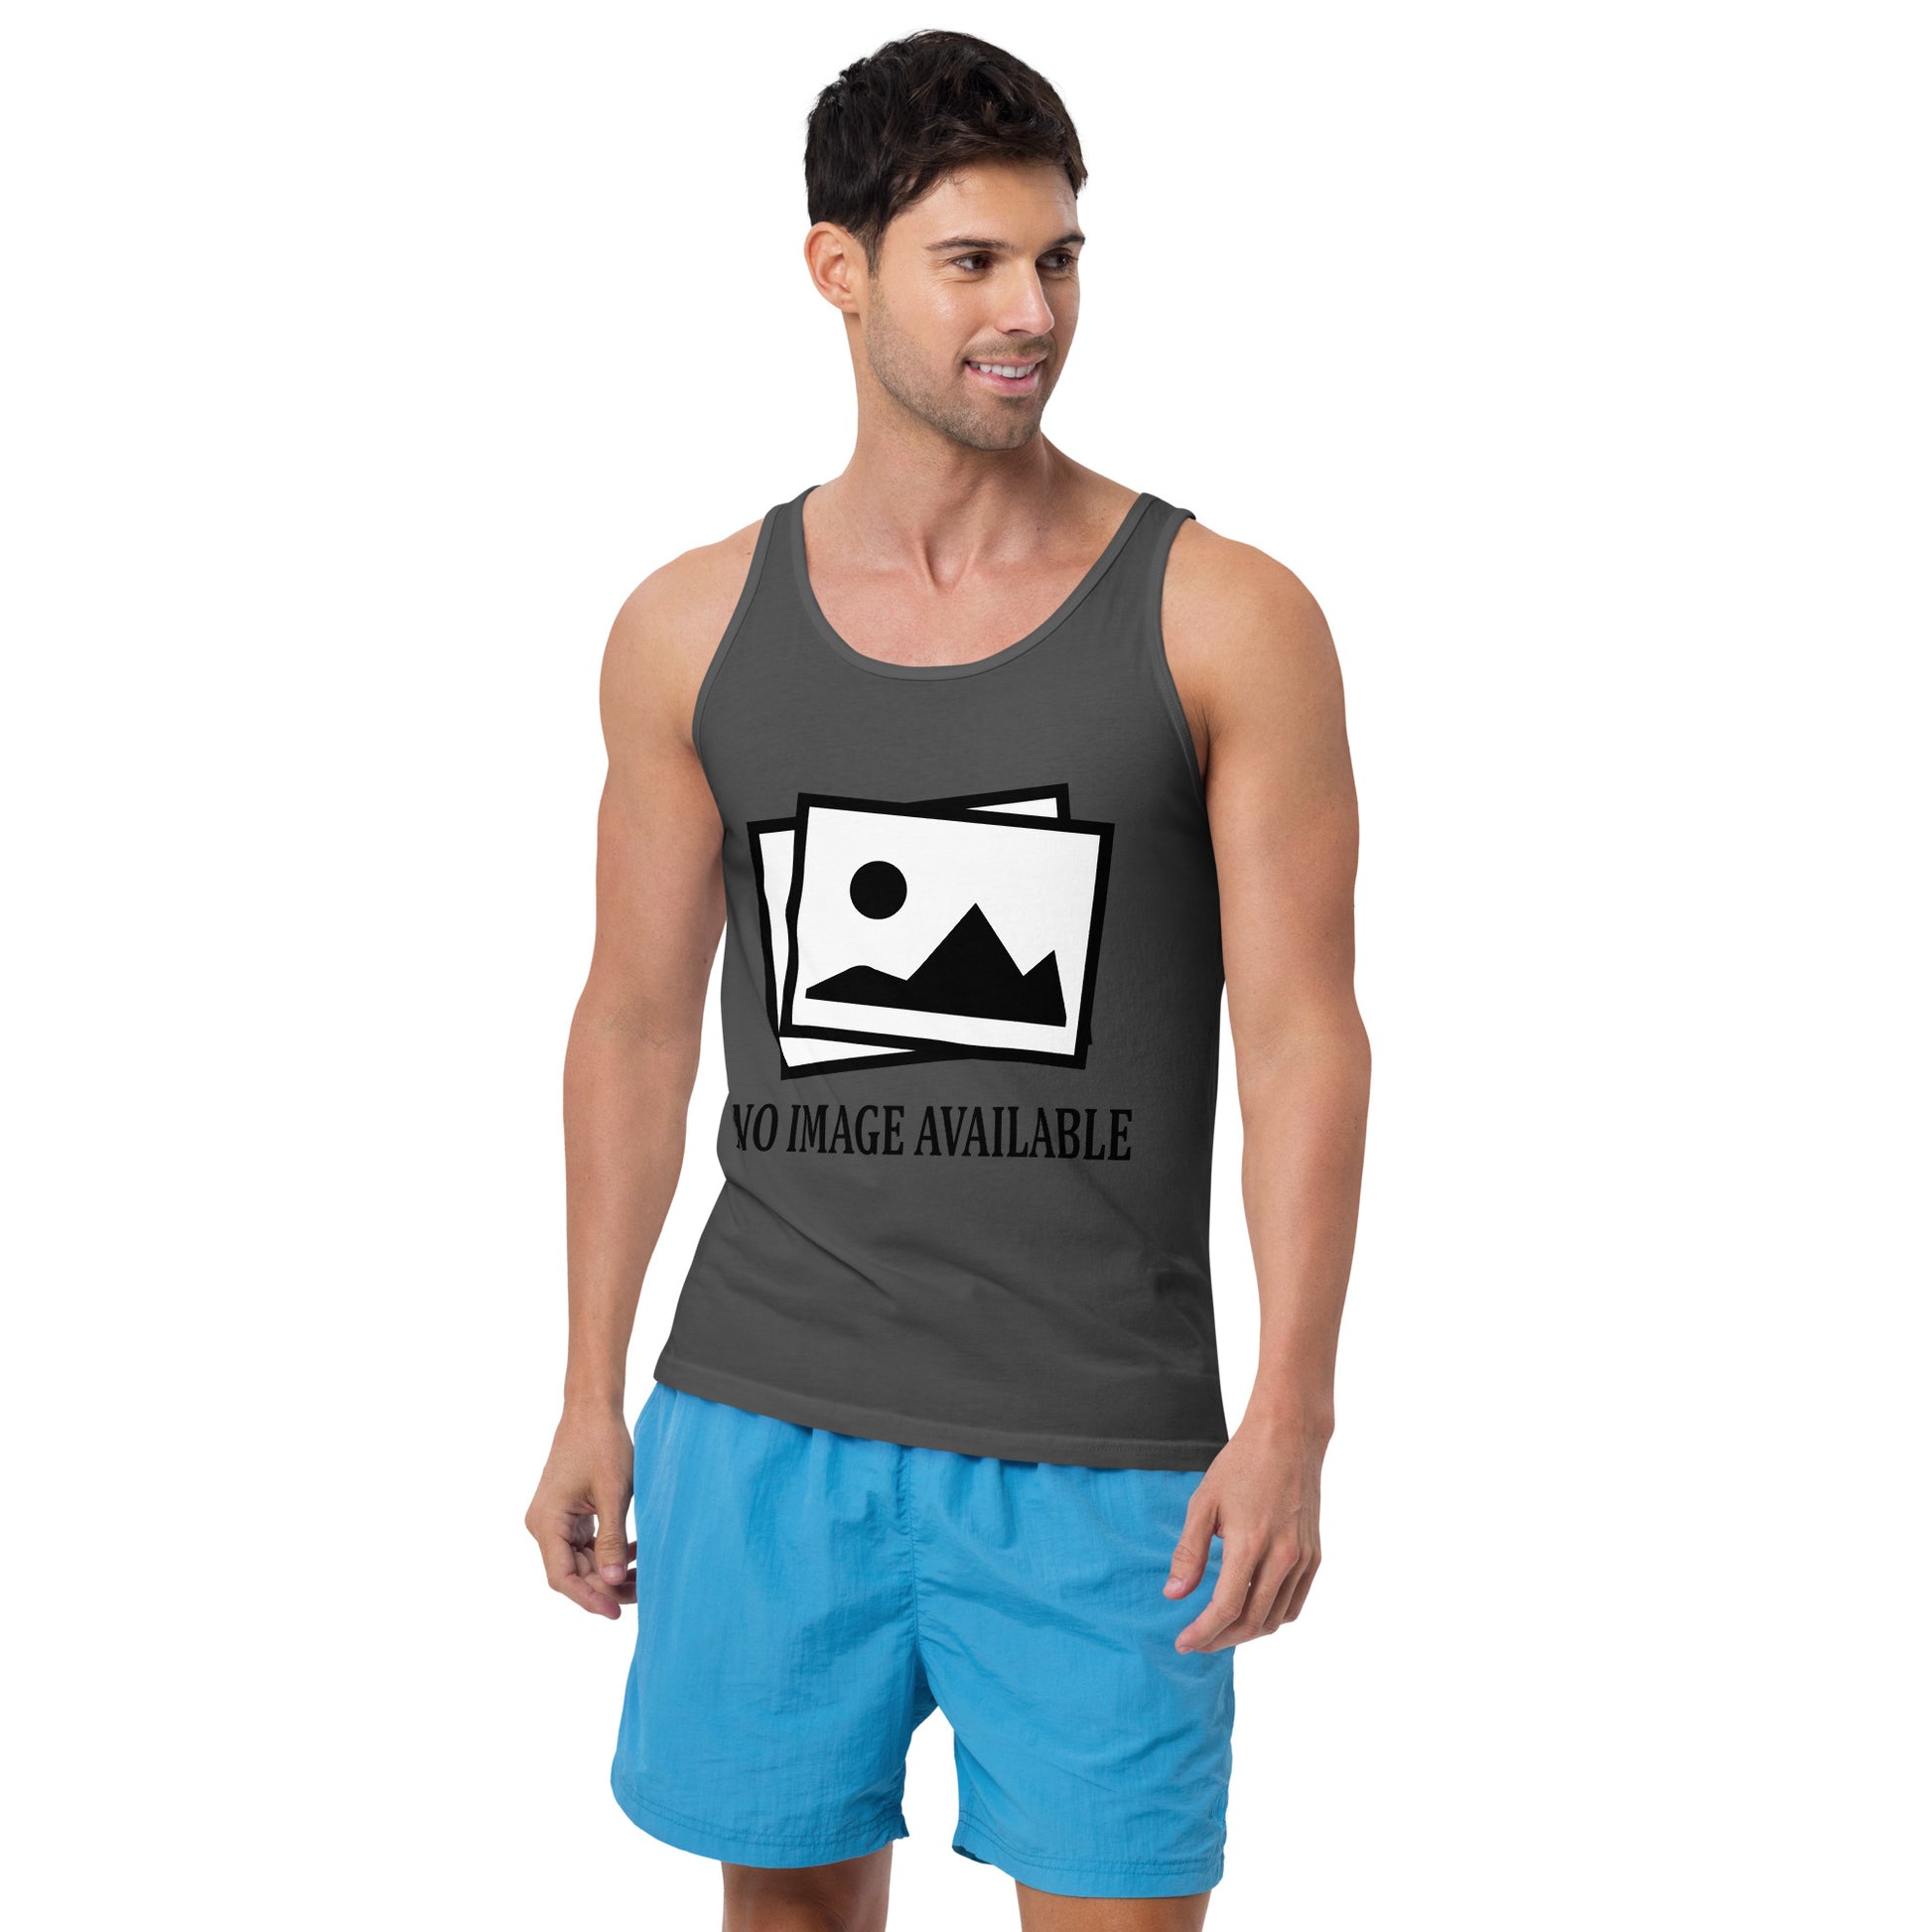 Men with grey tank top with image and text "no image available"